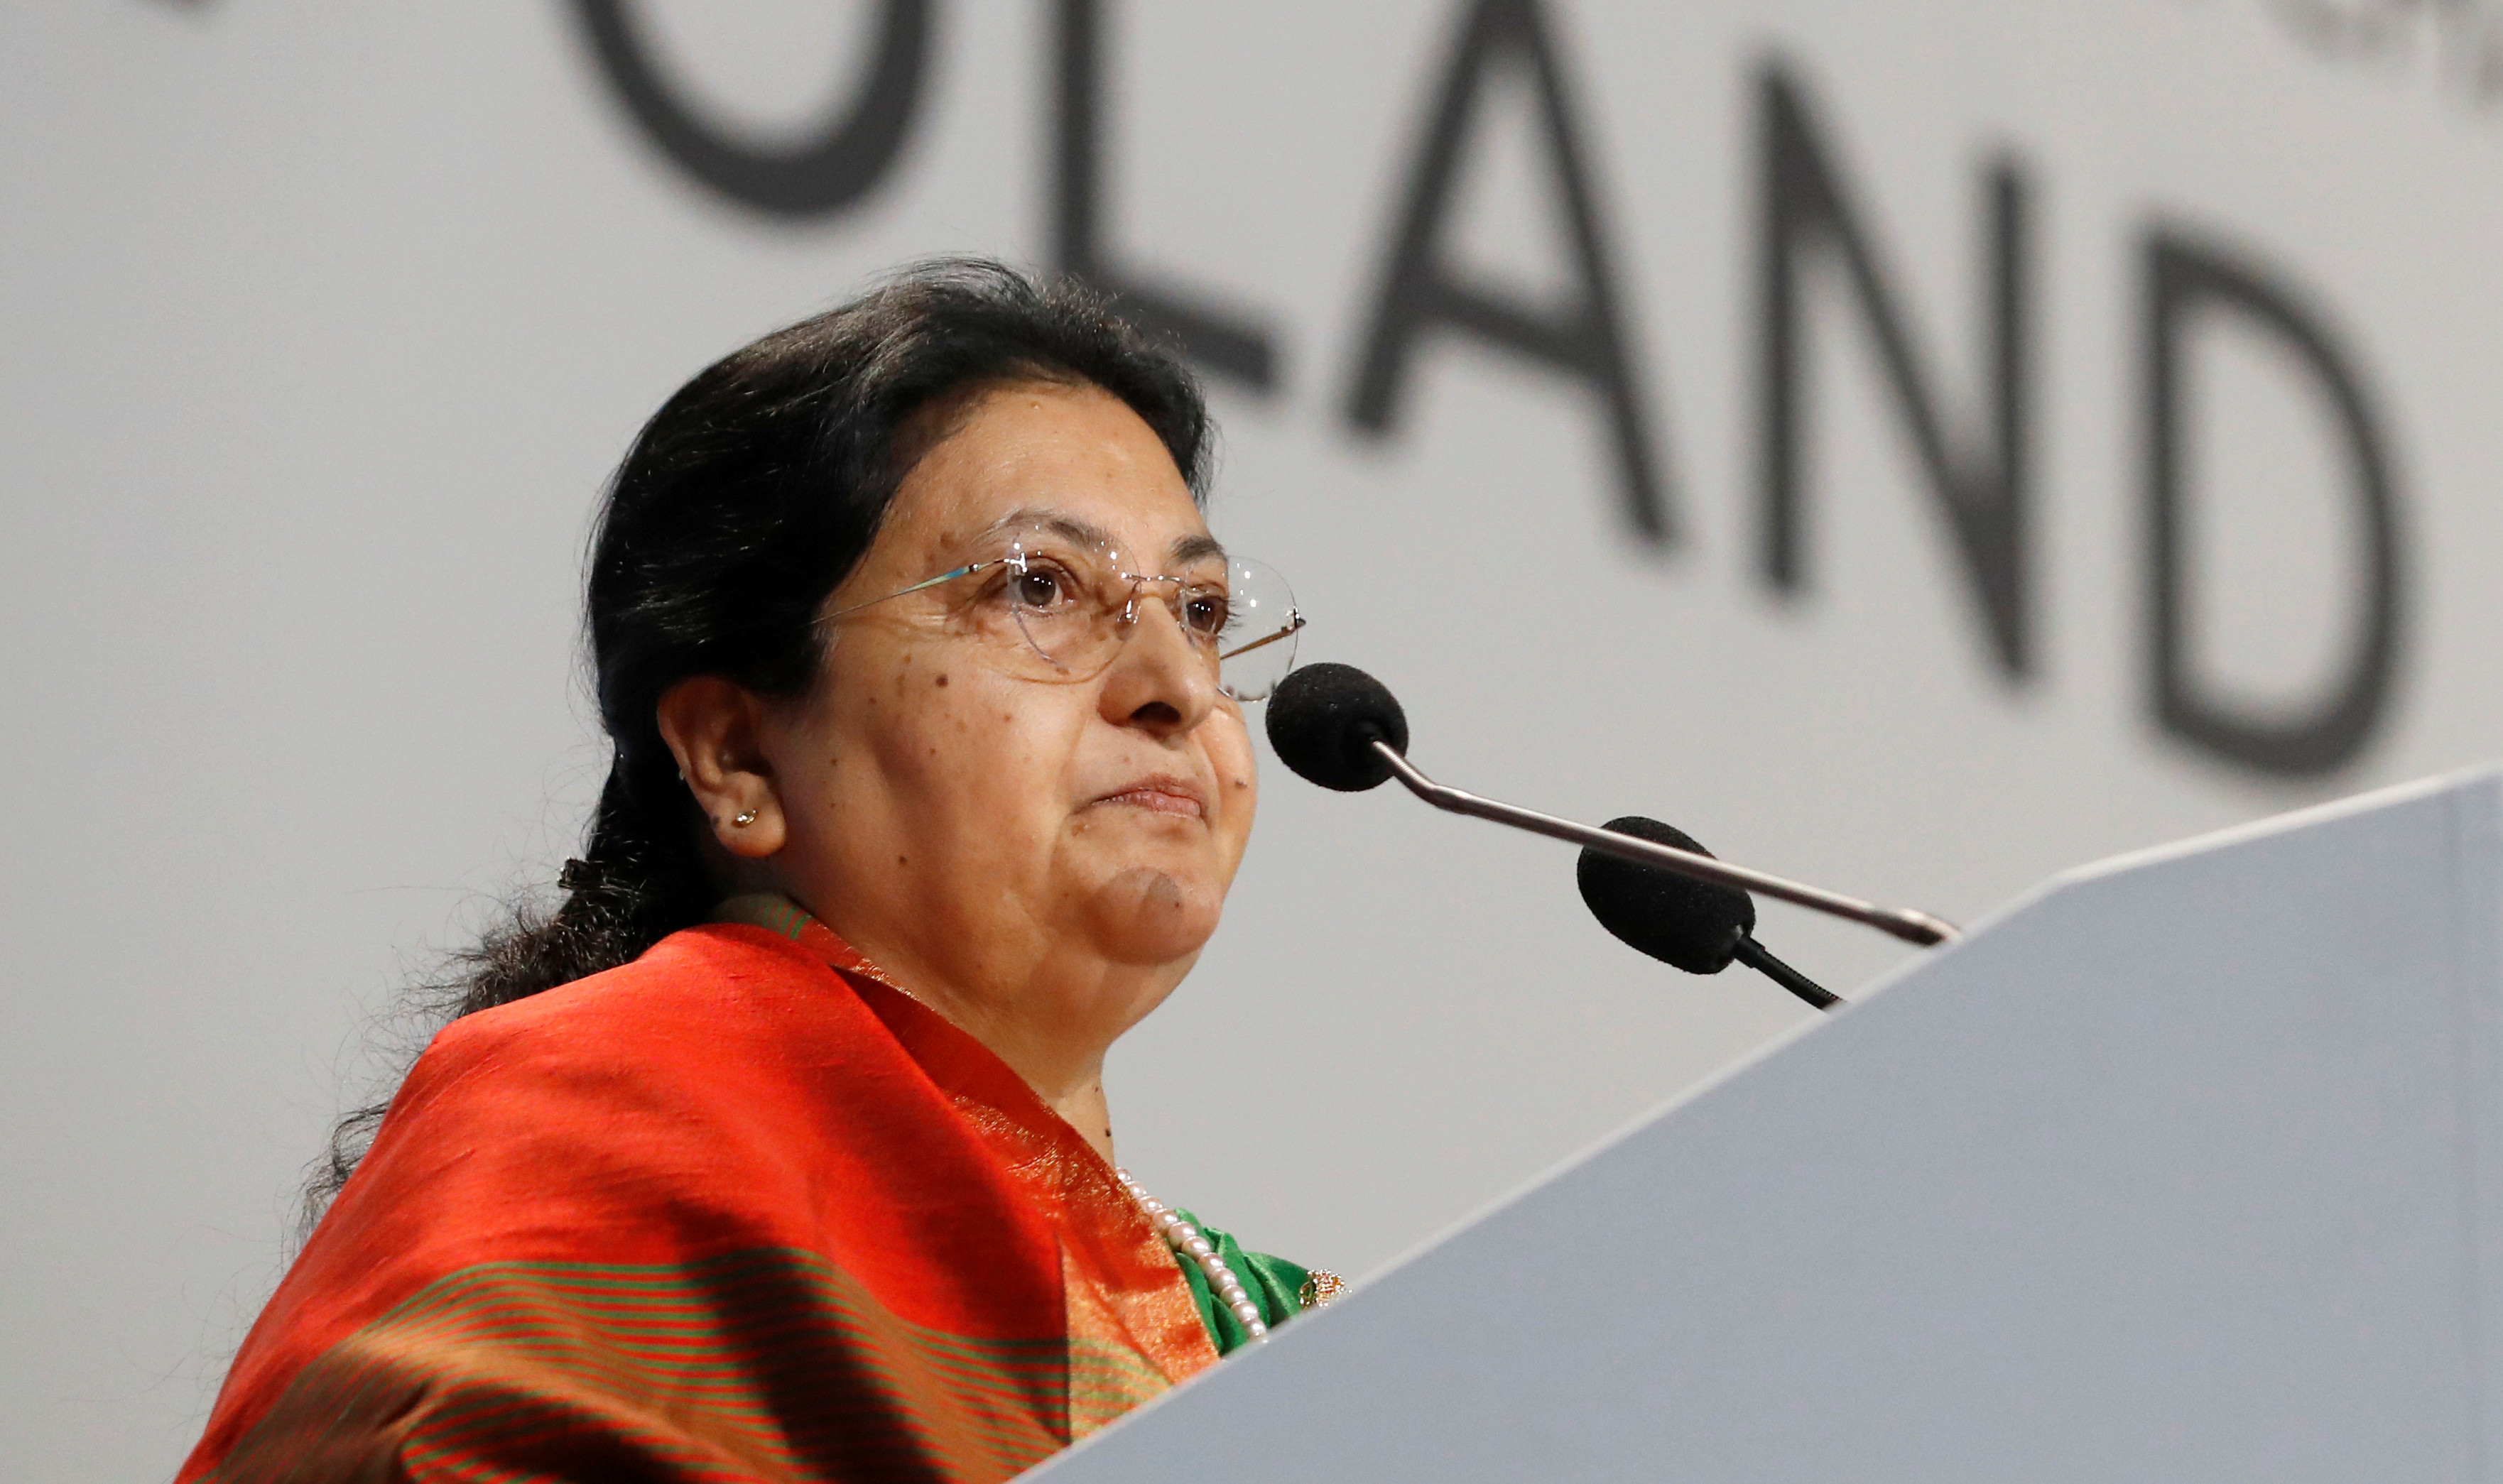 president of nepal bidhya devi bhandari speaks during the cop24 un climate change conference 2018 in katowice poland december 3 2018 photo reuters file